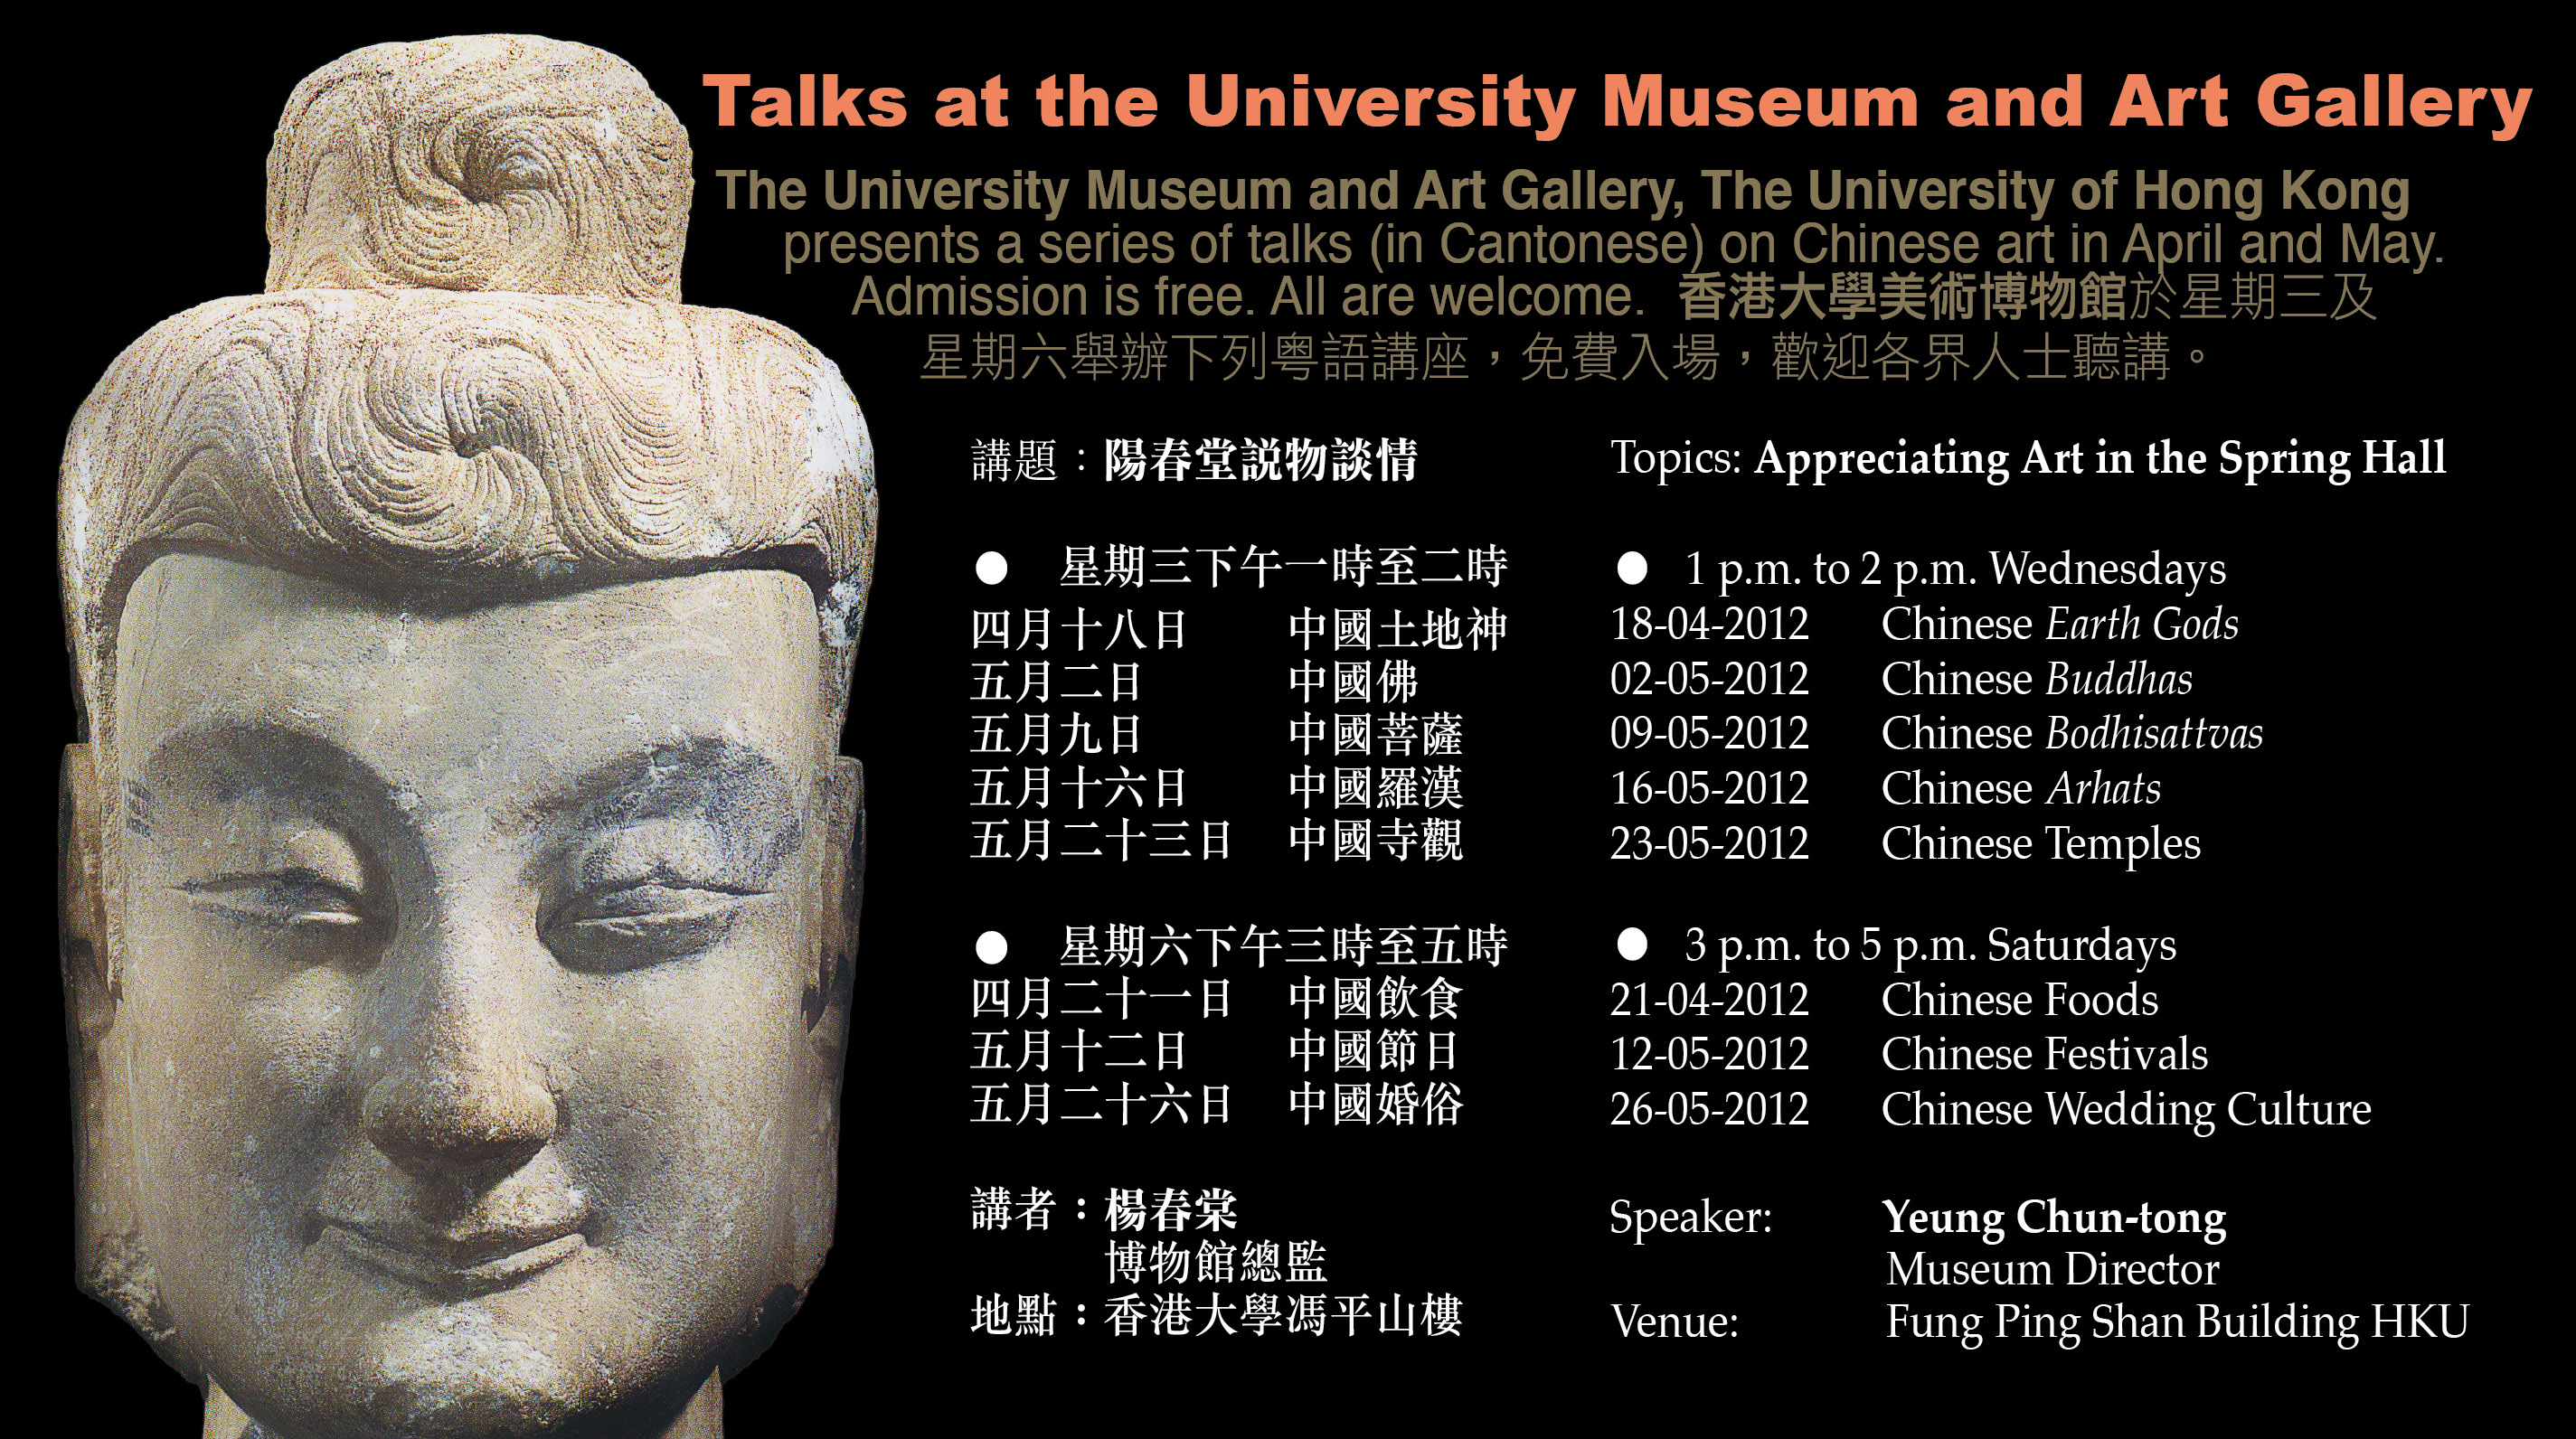 Talks at the University Museum and Art Gallery